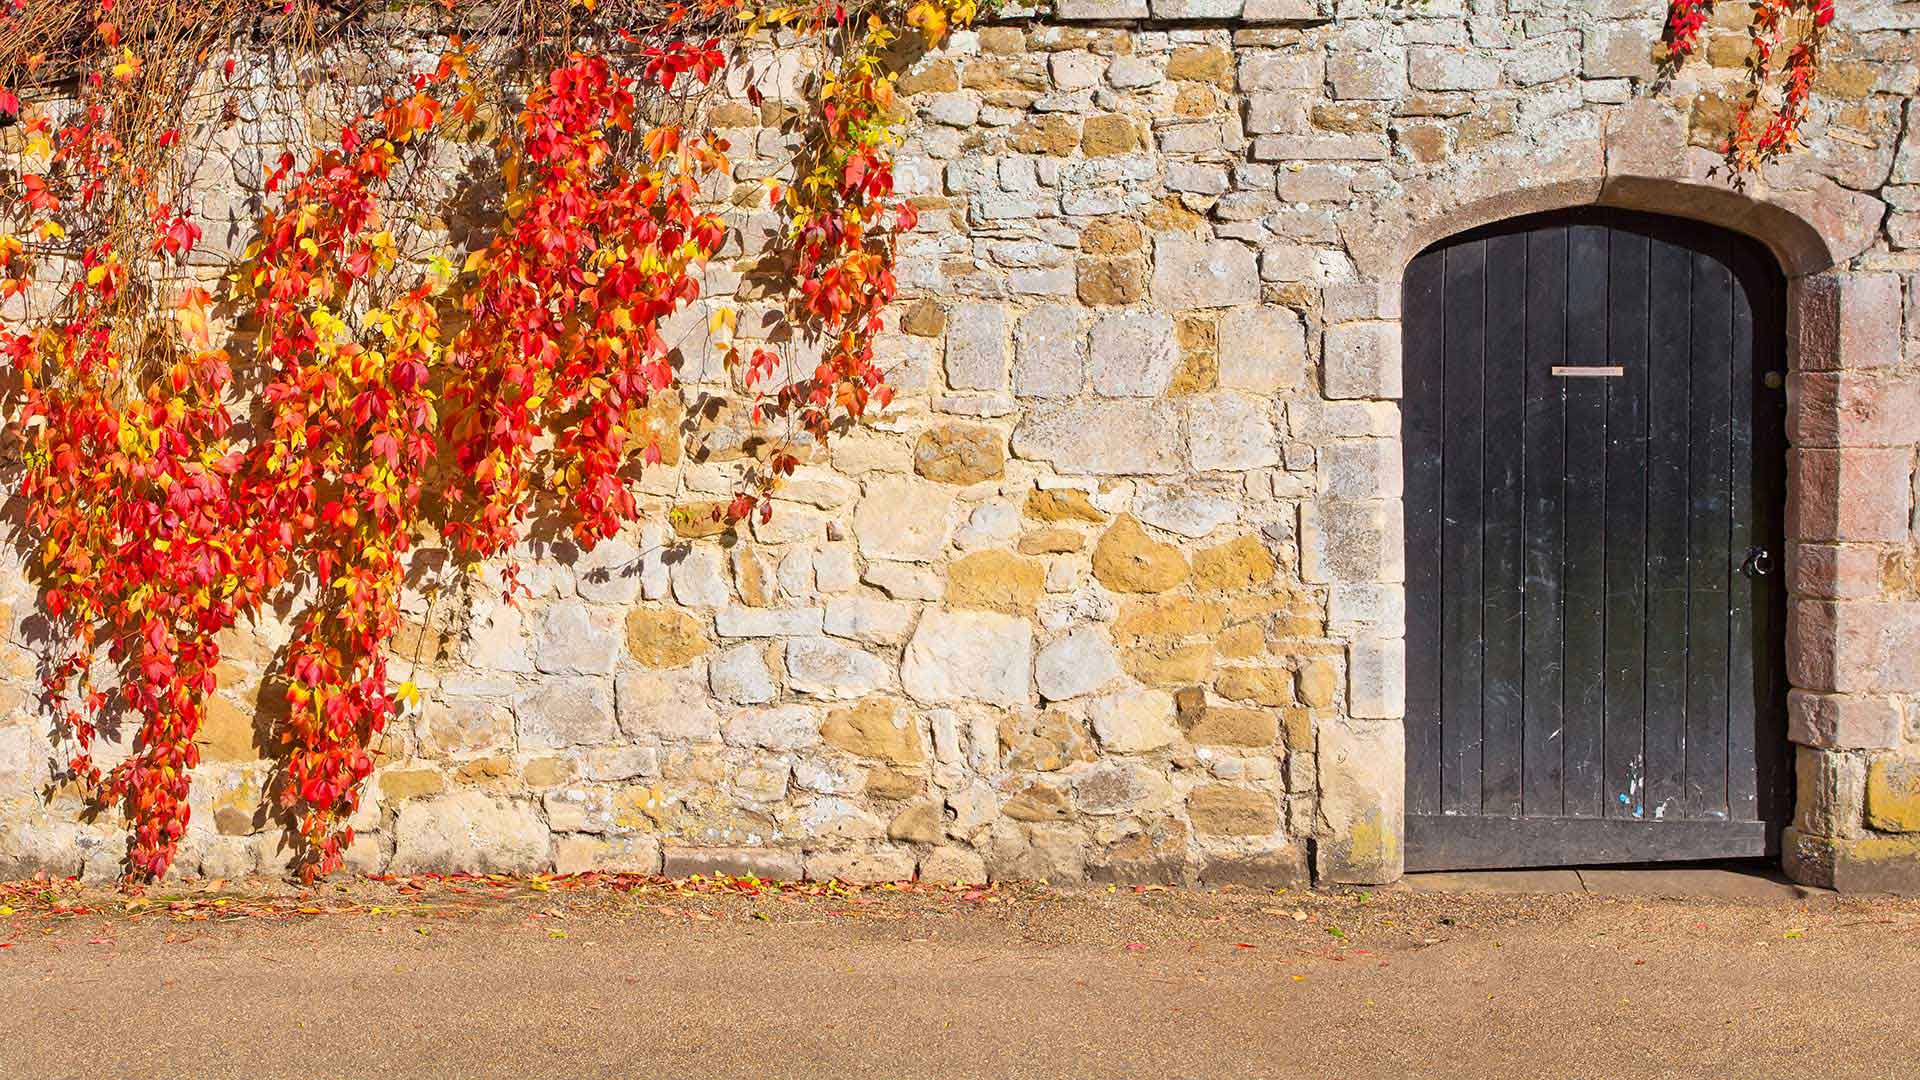 Orange and yellow fall leaves and stone wall of a Cambridge college gate